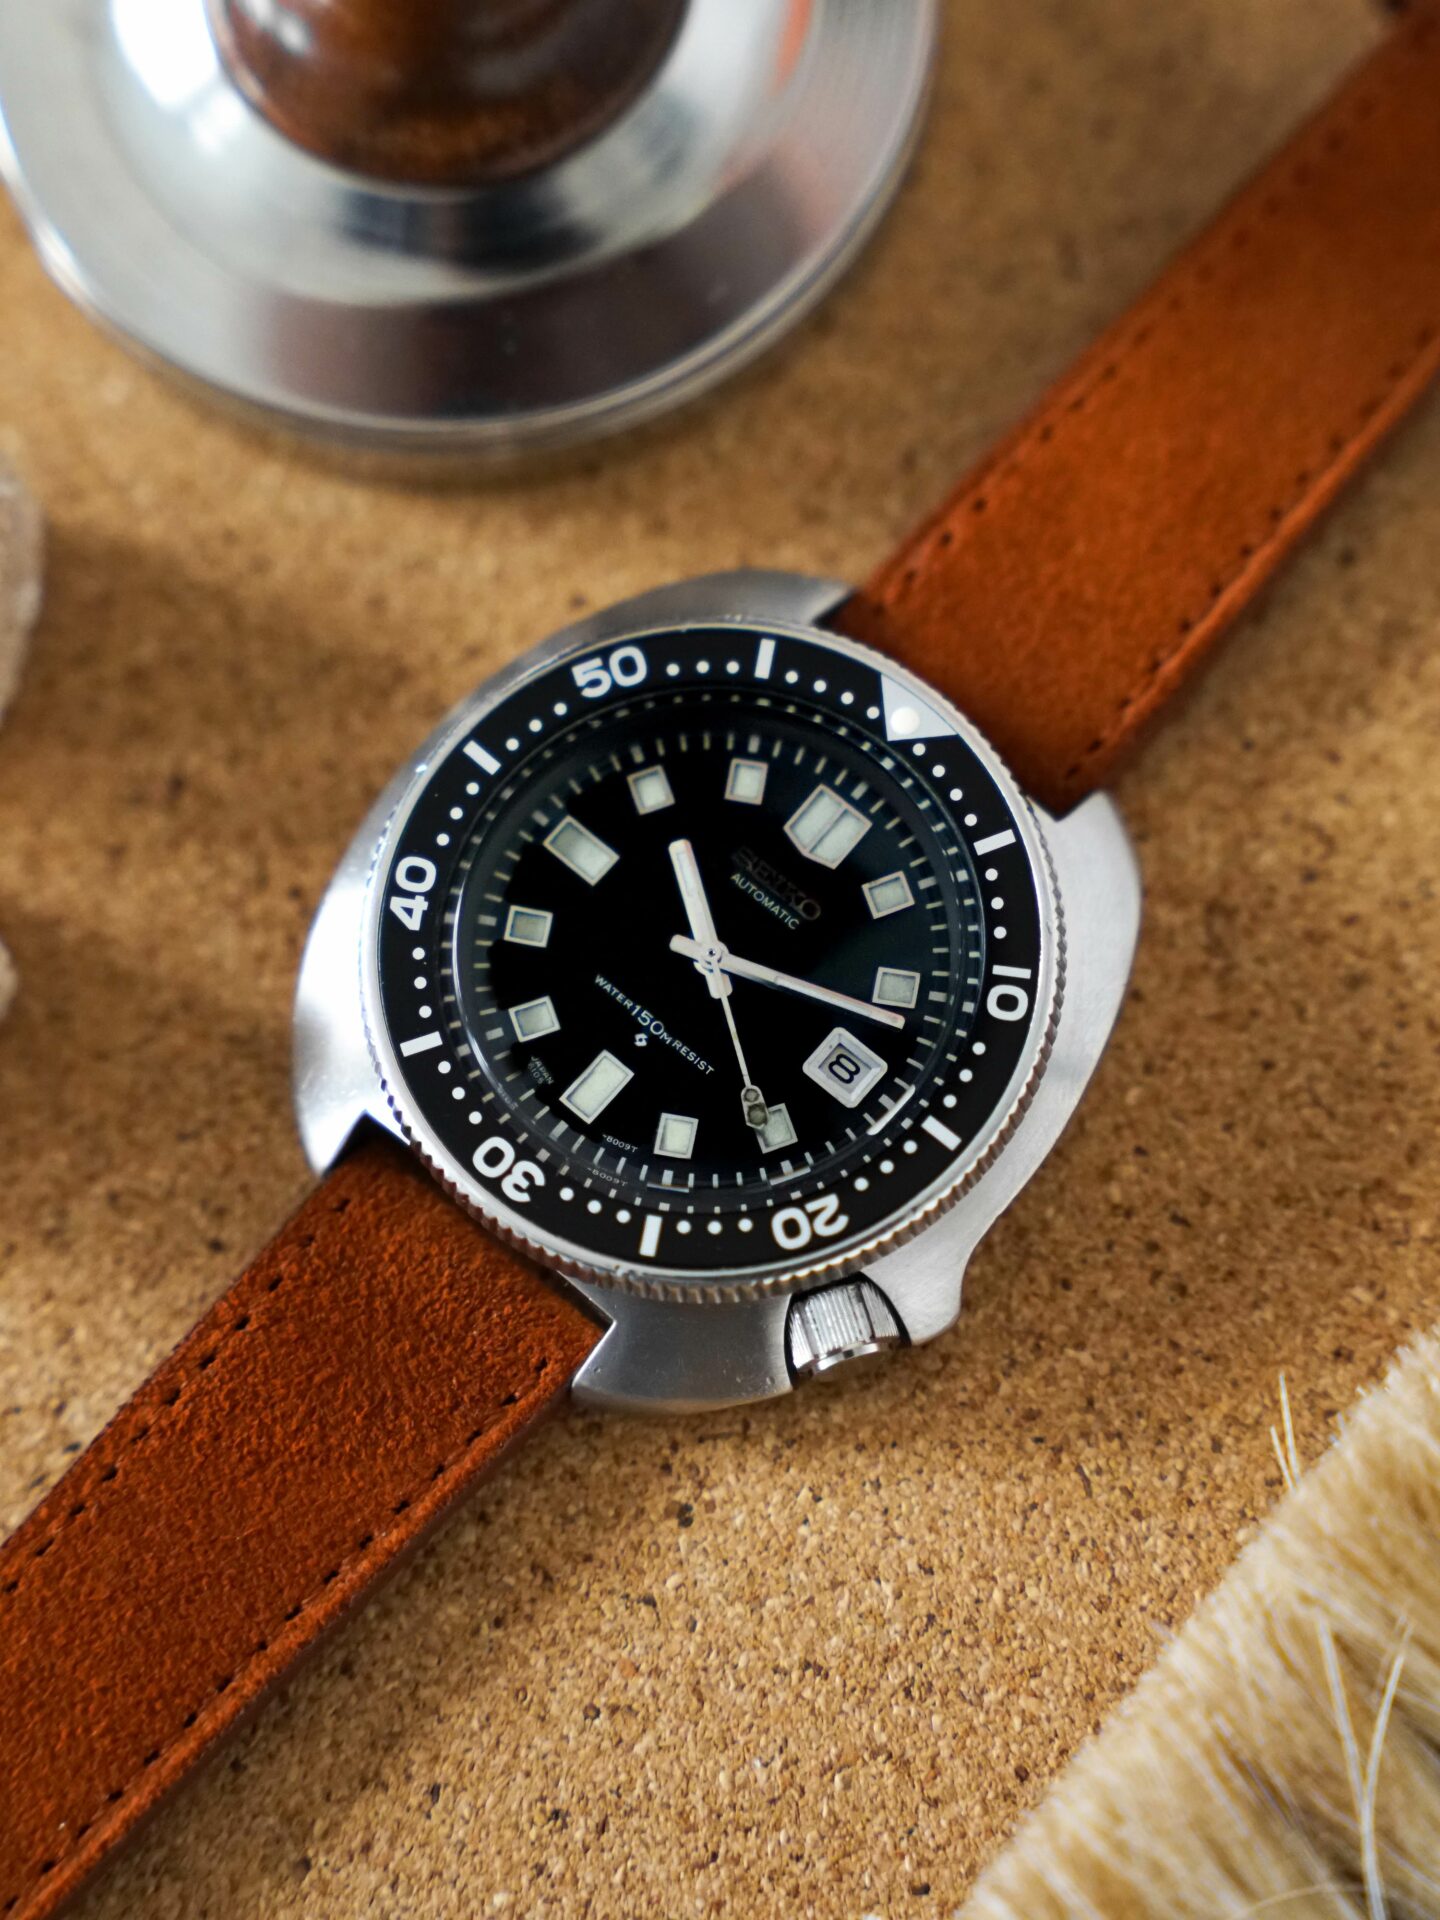 The Seiko Turtle: True Icon of the Dive Watch World – Craft + Tailored